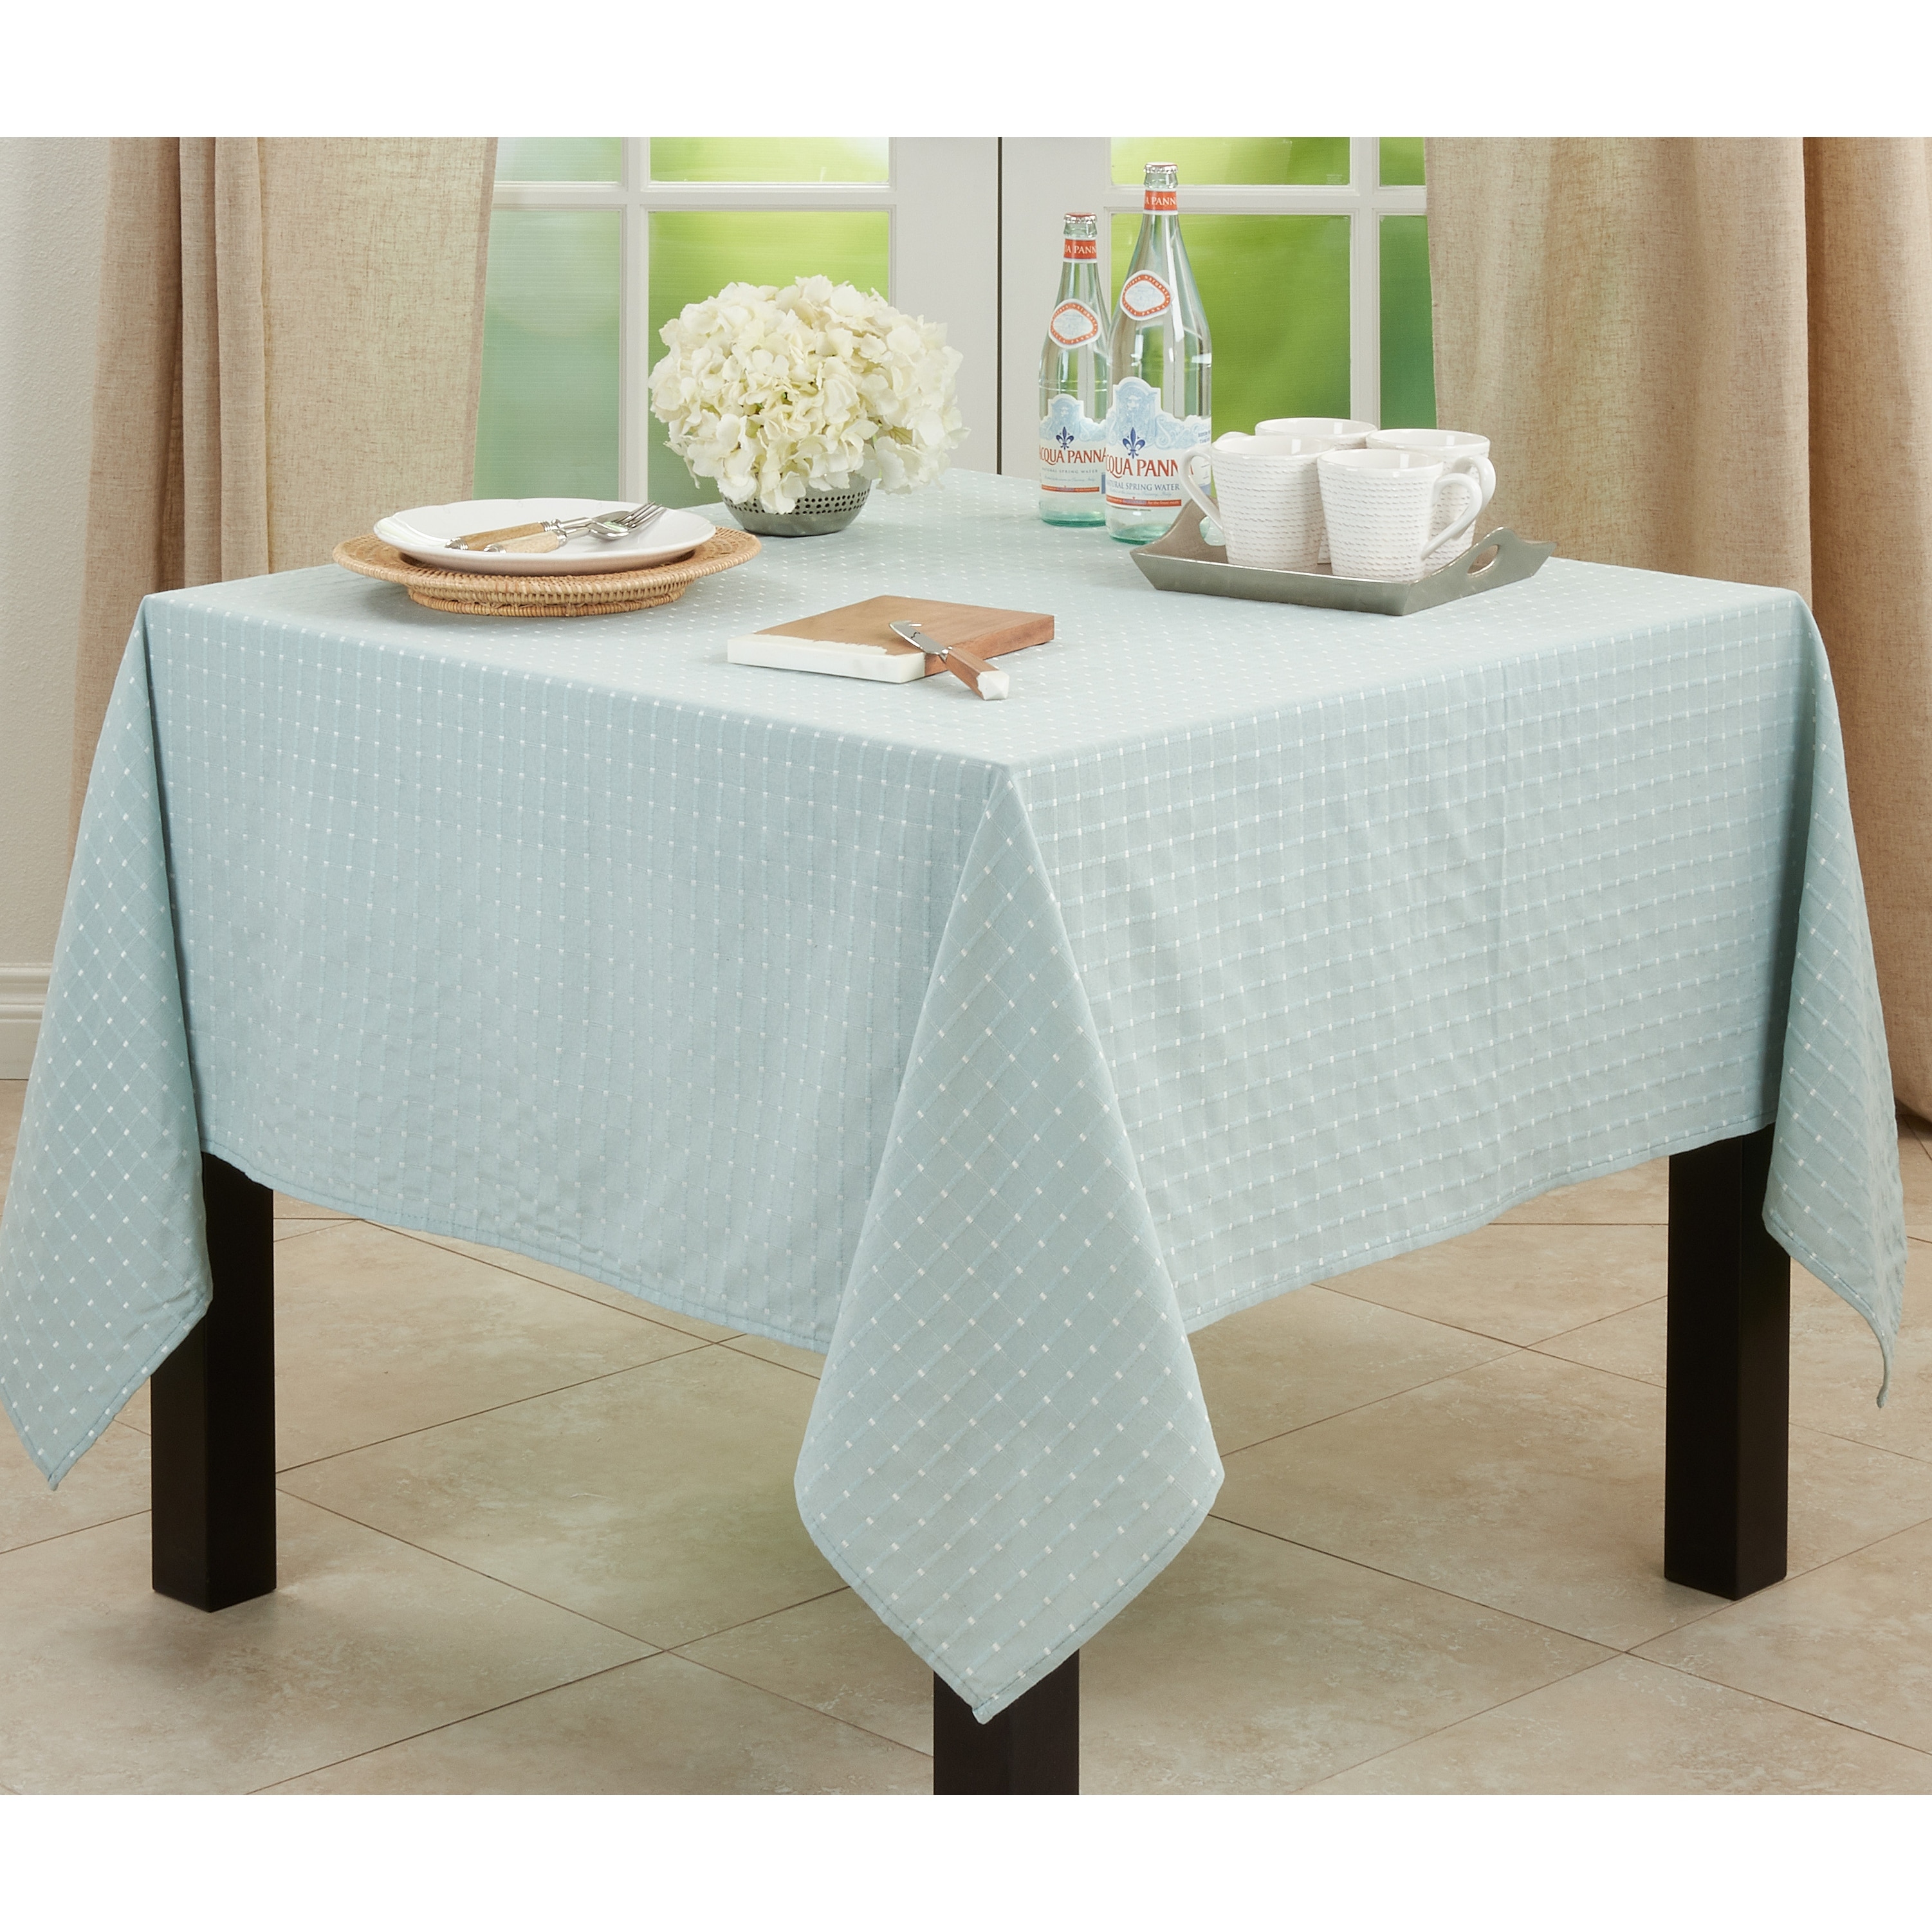 Cotton Blend Tablecloth with Stitched Line Design